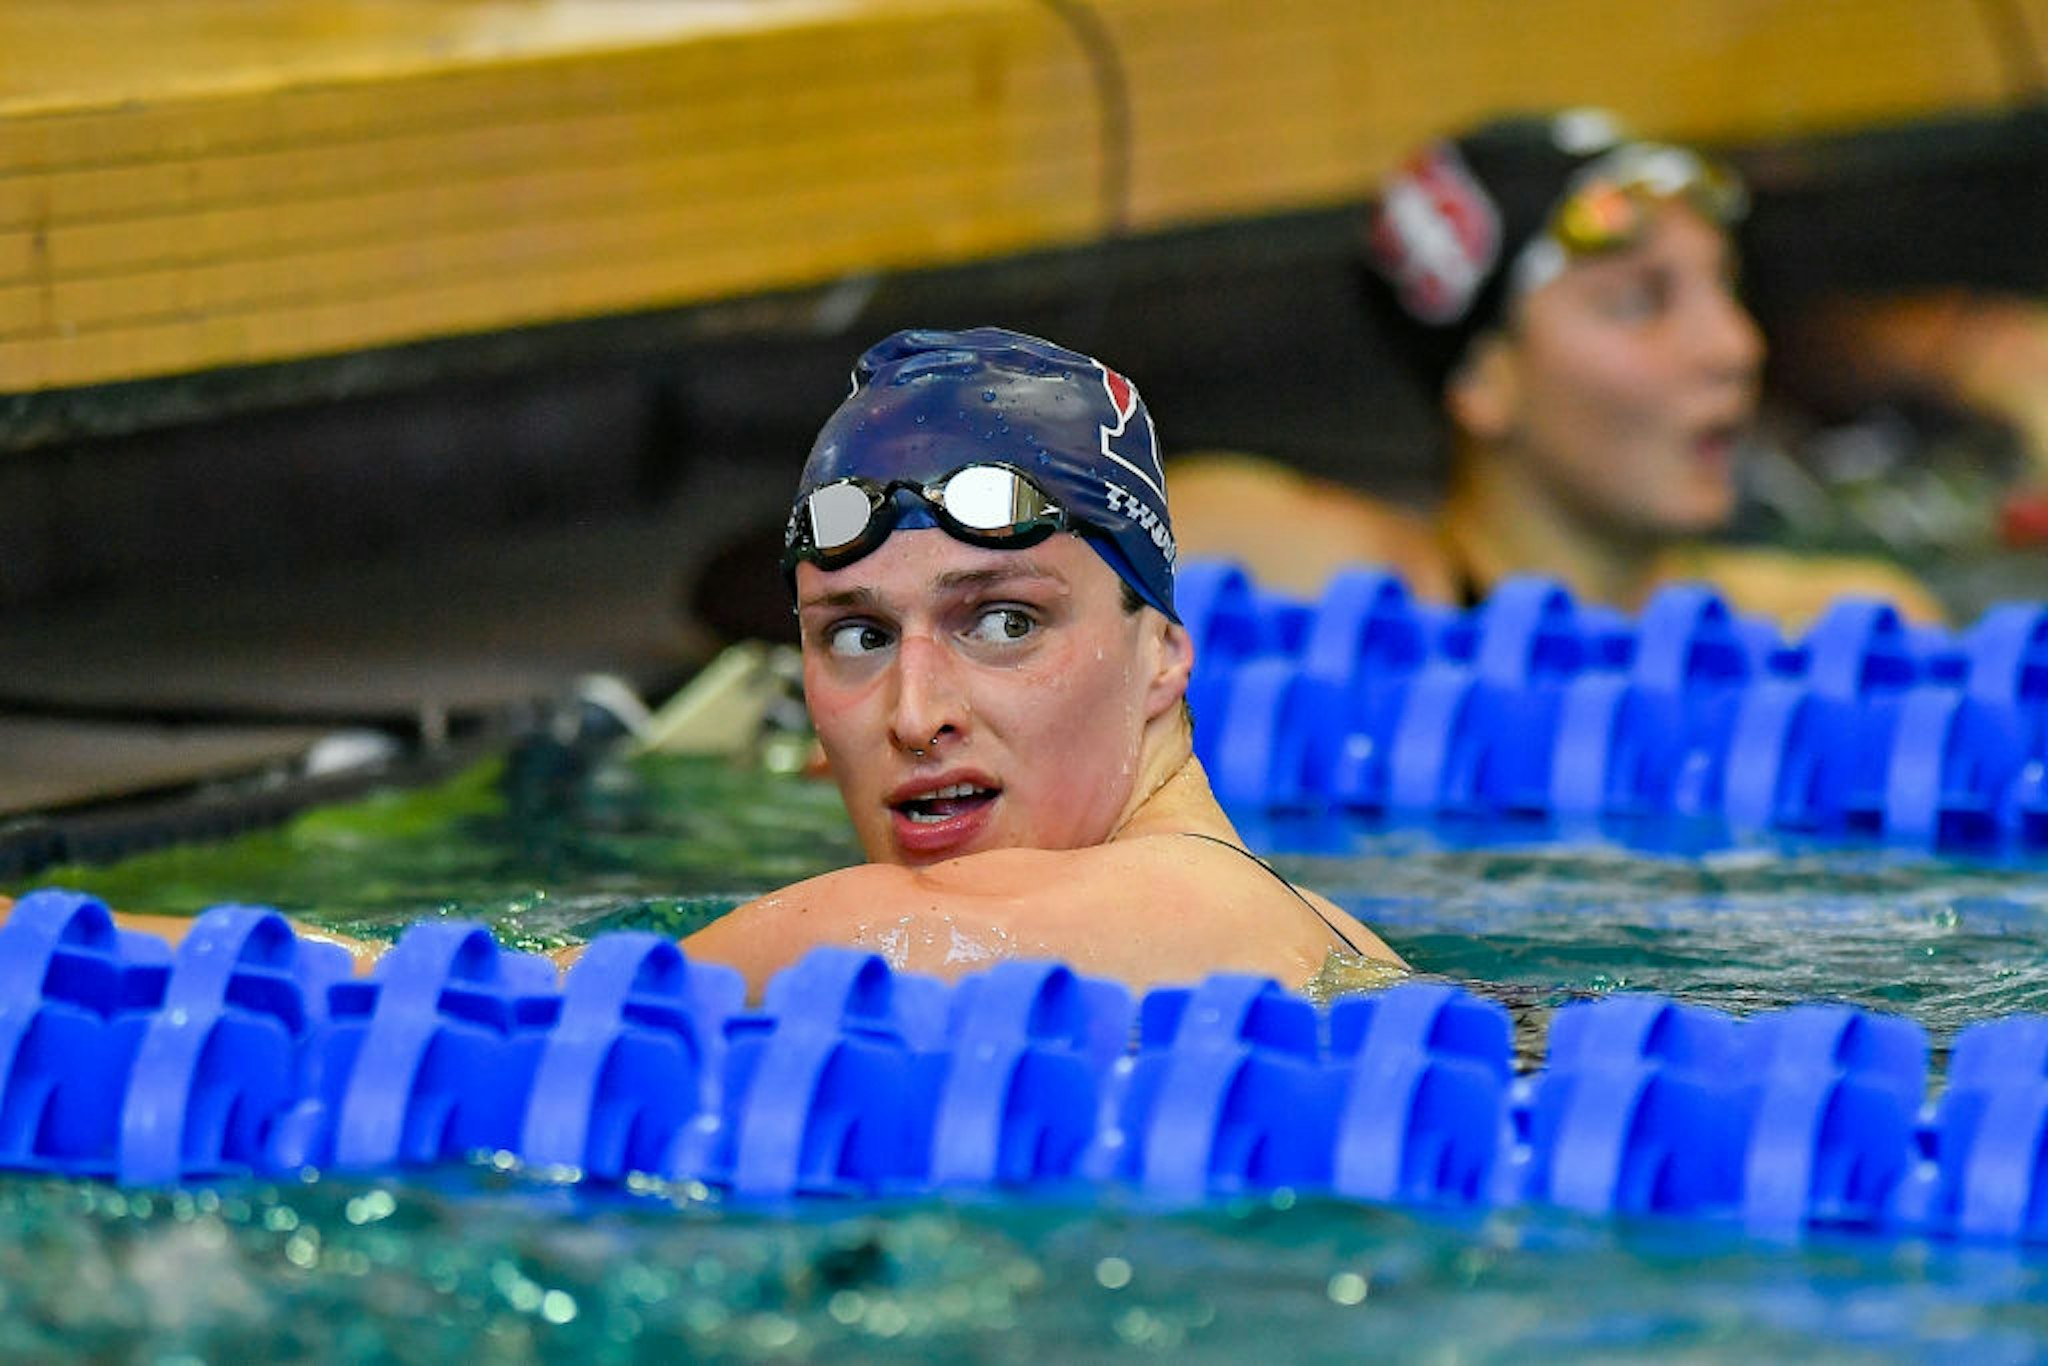 ATLANTA, GA - MARCH 17: University of Pennsylvania swimmer Lia Thomas reacts after winning the 500 Freestyle prelims during the NCAA Swimming and Diving Championships on March 17th, 2022 at the McAuley Aquatic Center in Atlanta Georgia. (Photo by Rich von Biberstein/Icon Sportswire via Getty Images)